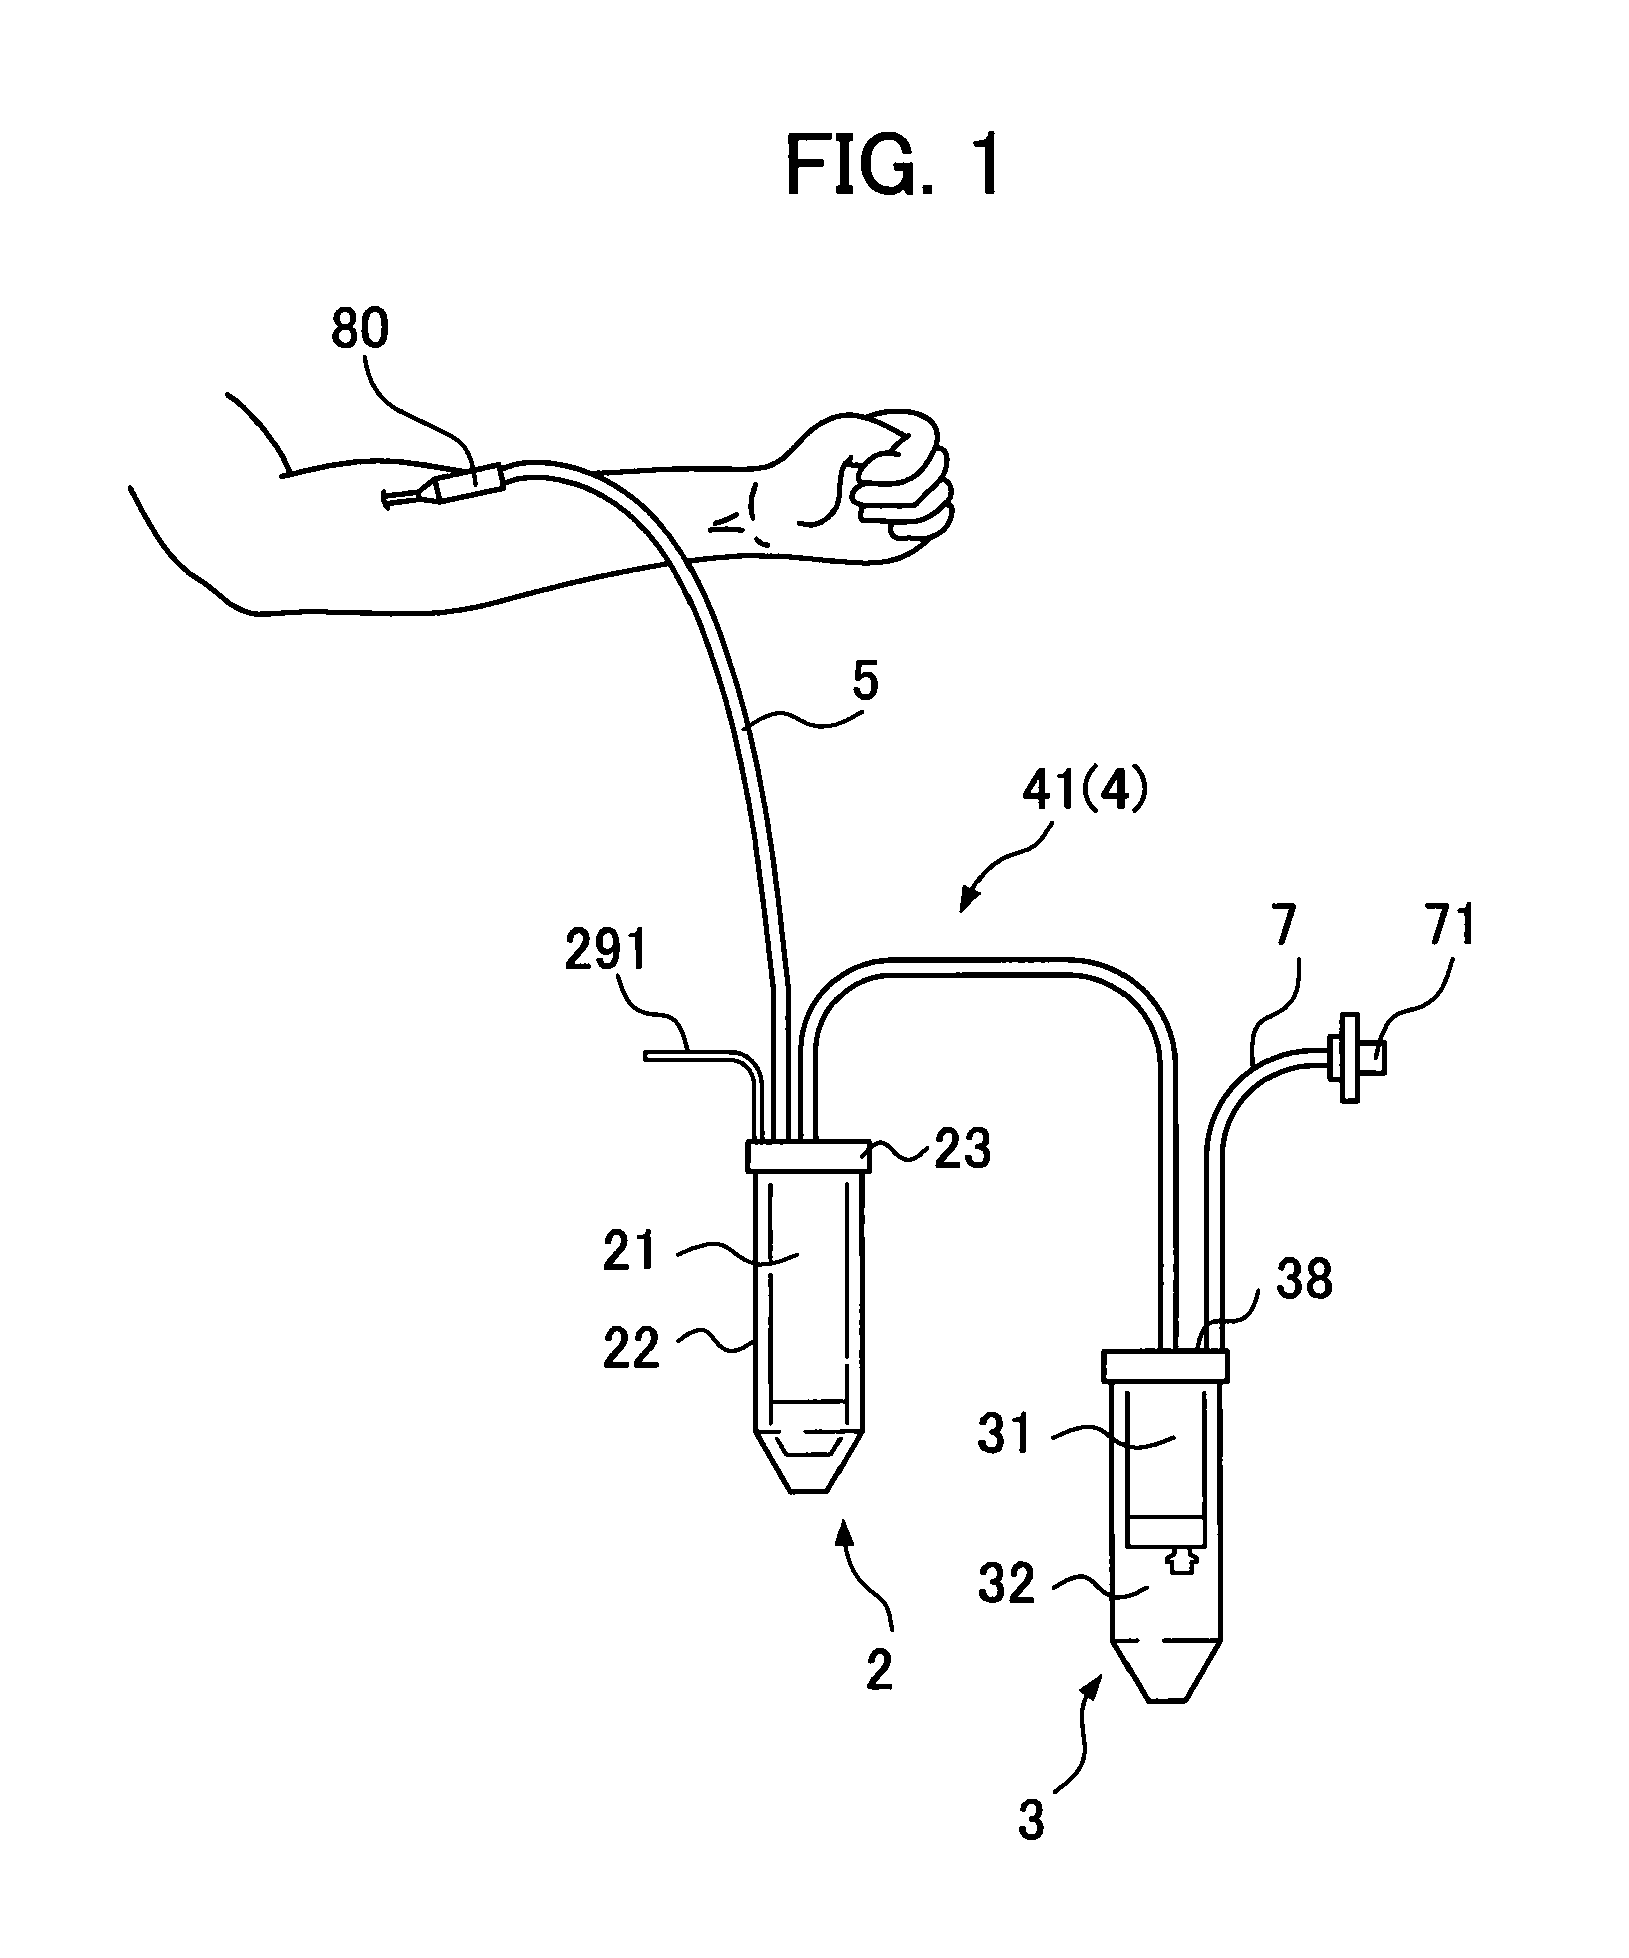 Apparatus for separating and storing blood components